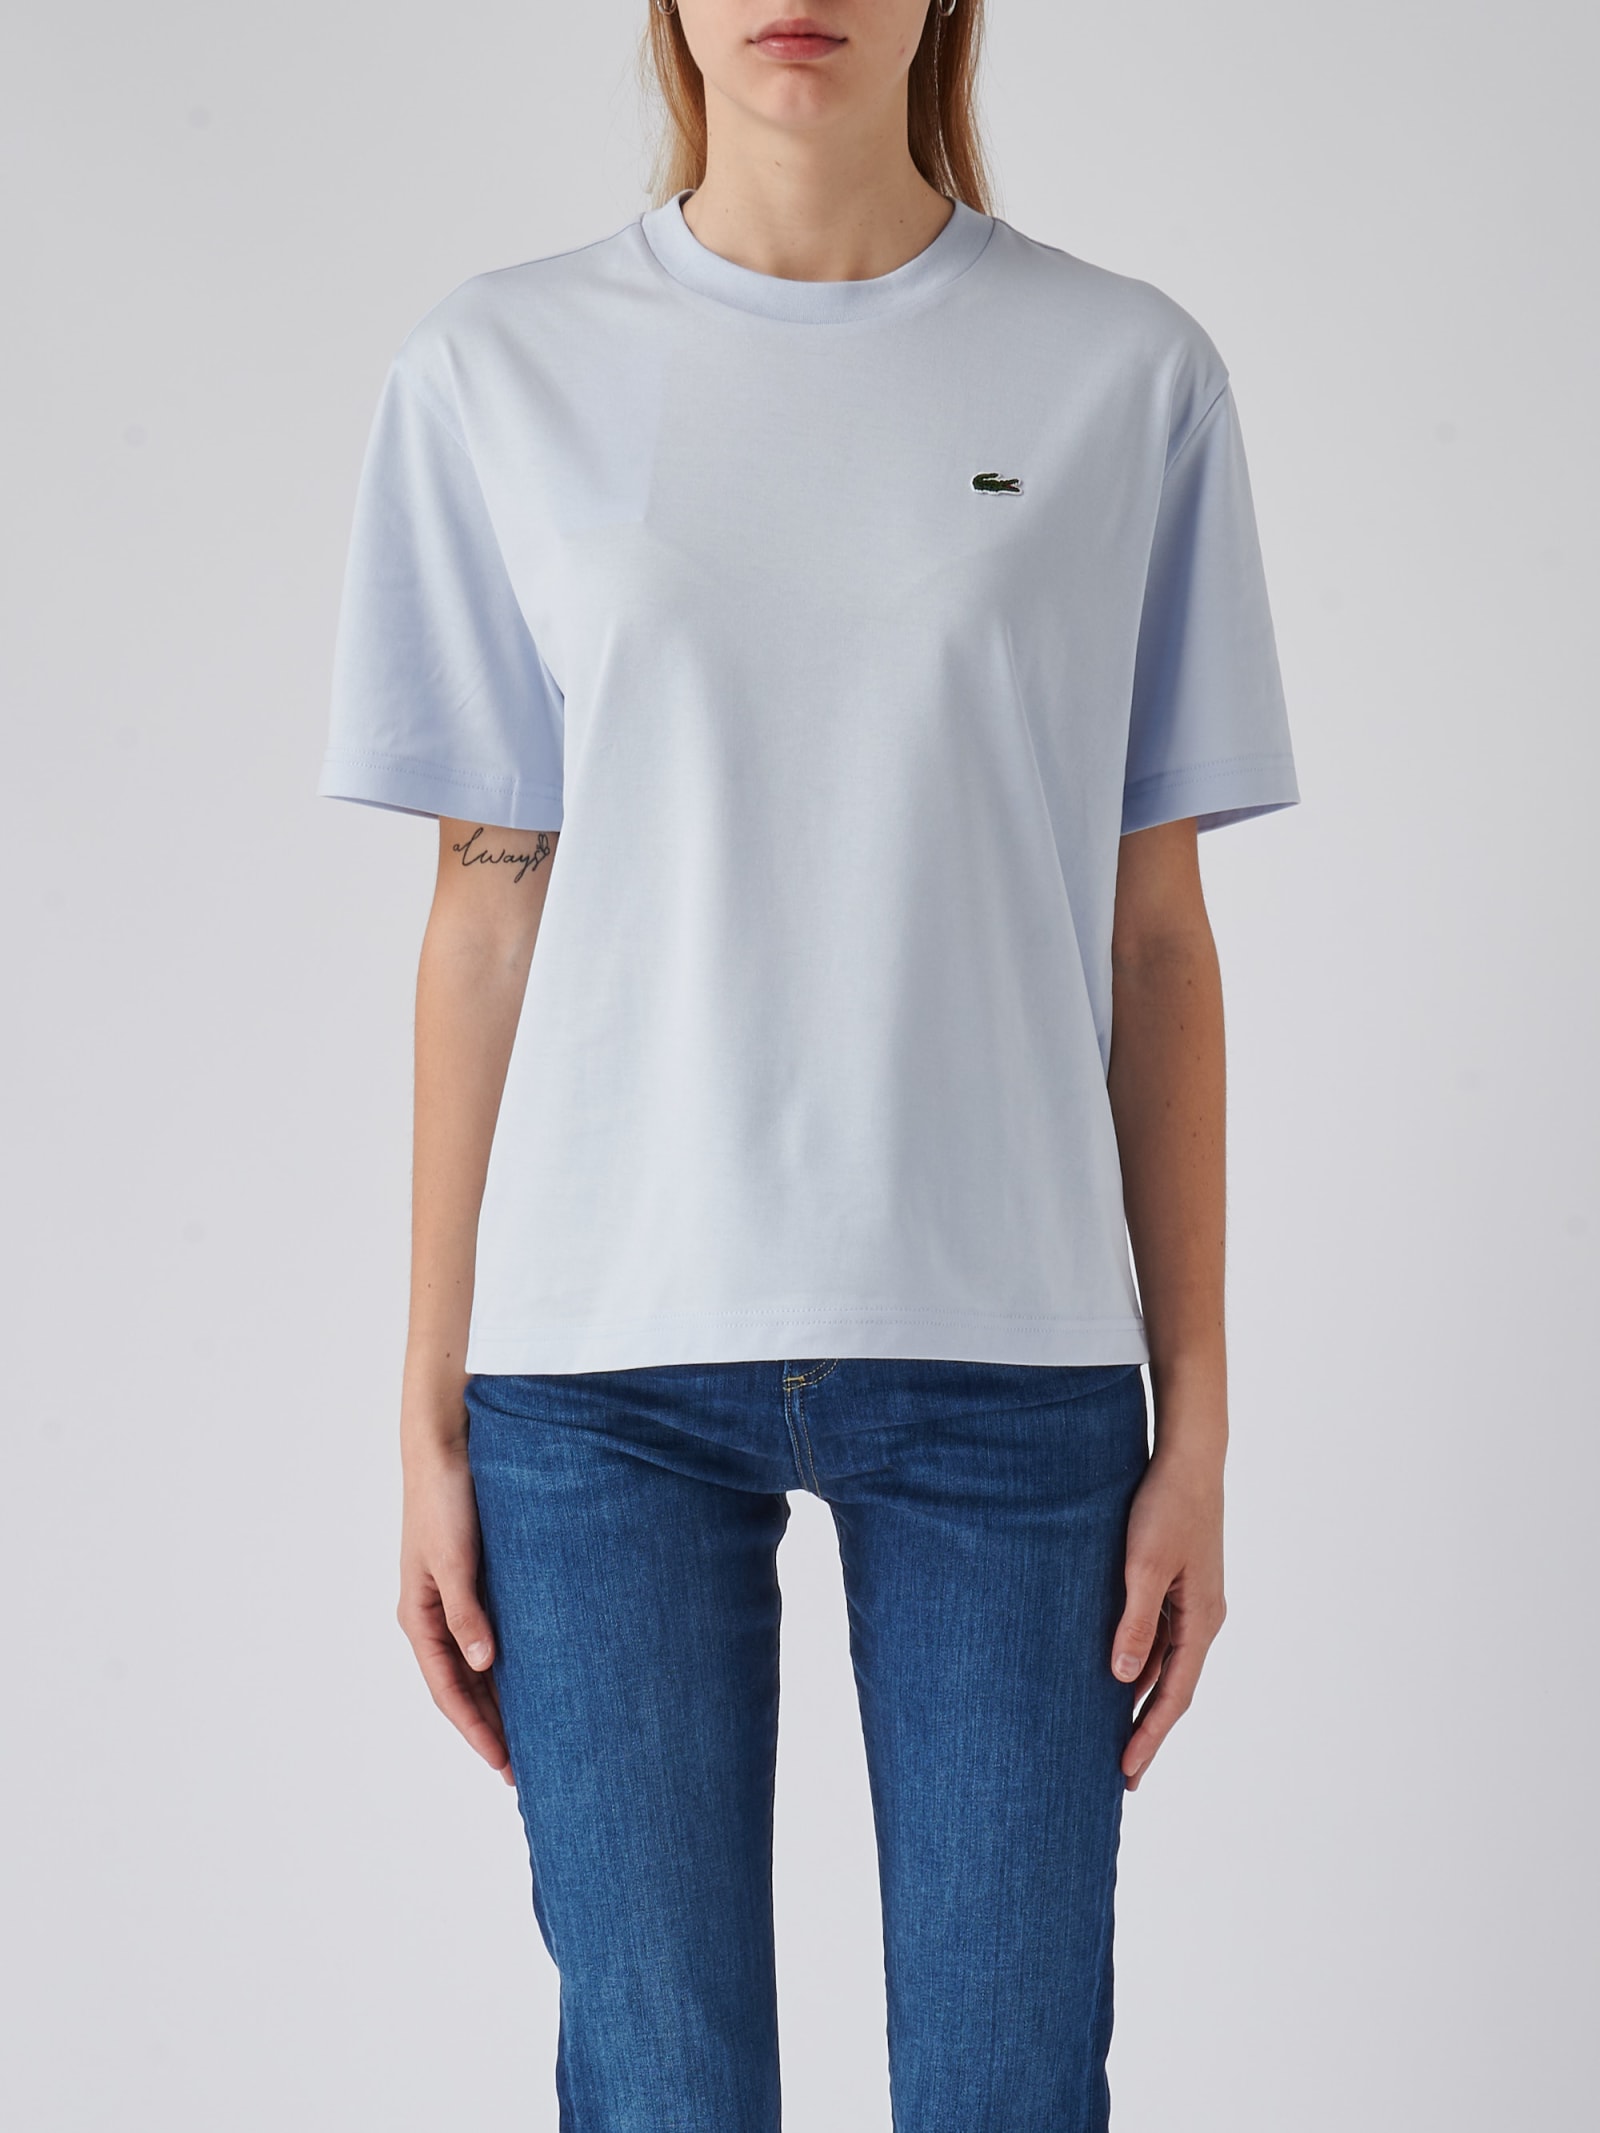 Lacoste Cotton T-shirt In Blue